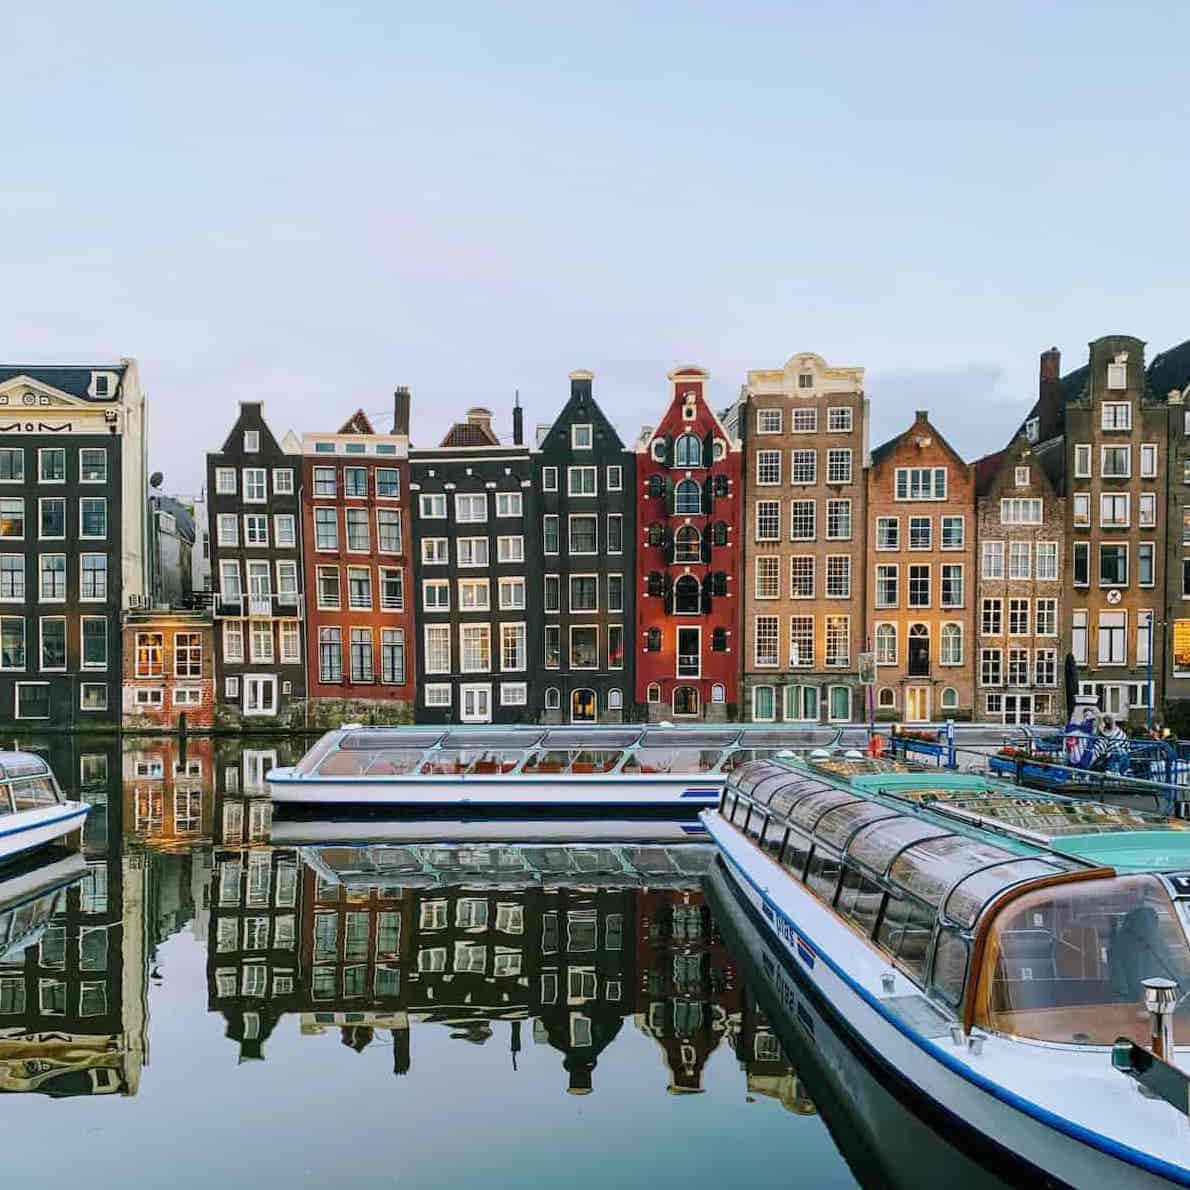 Amsterdam canal with tourist boats and traditional house facades